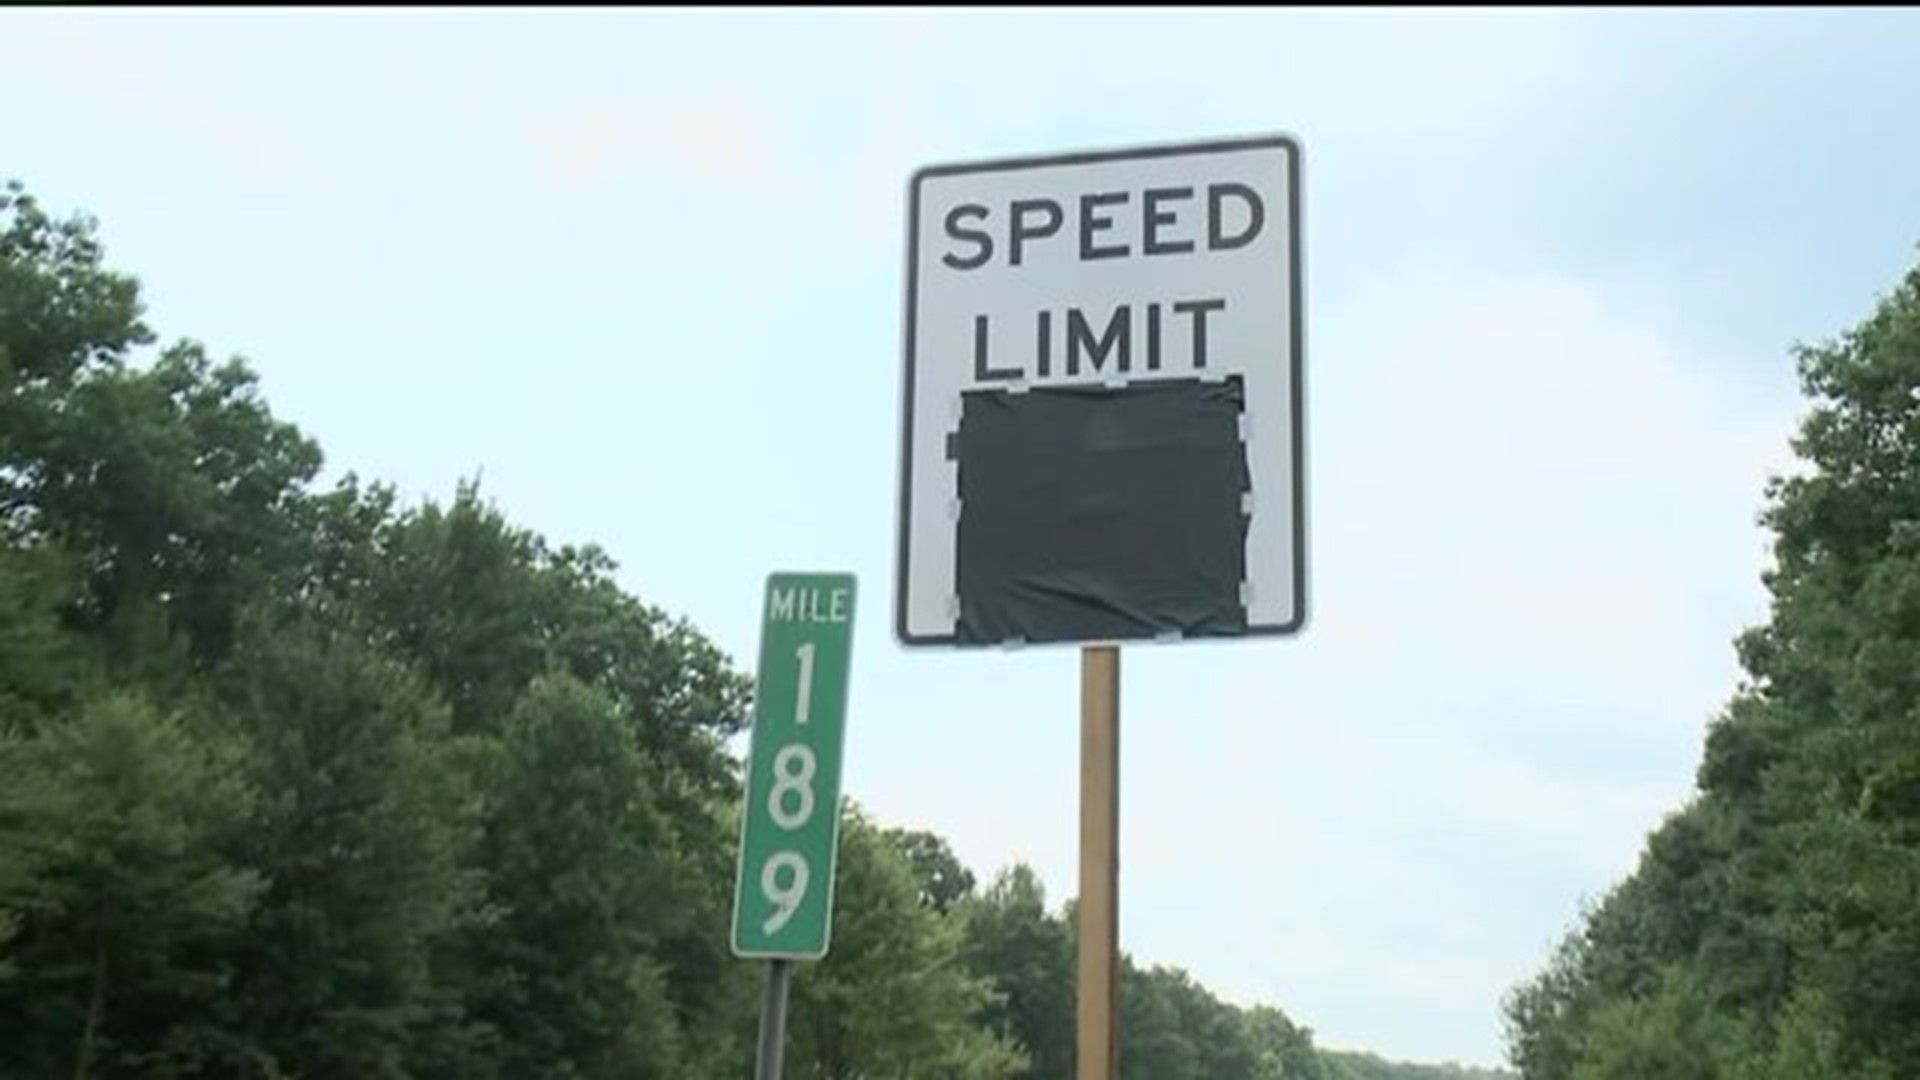 Part of I-80 to Increase to 70mph